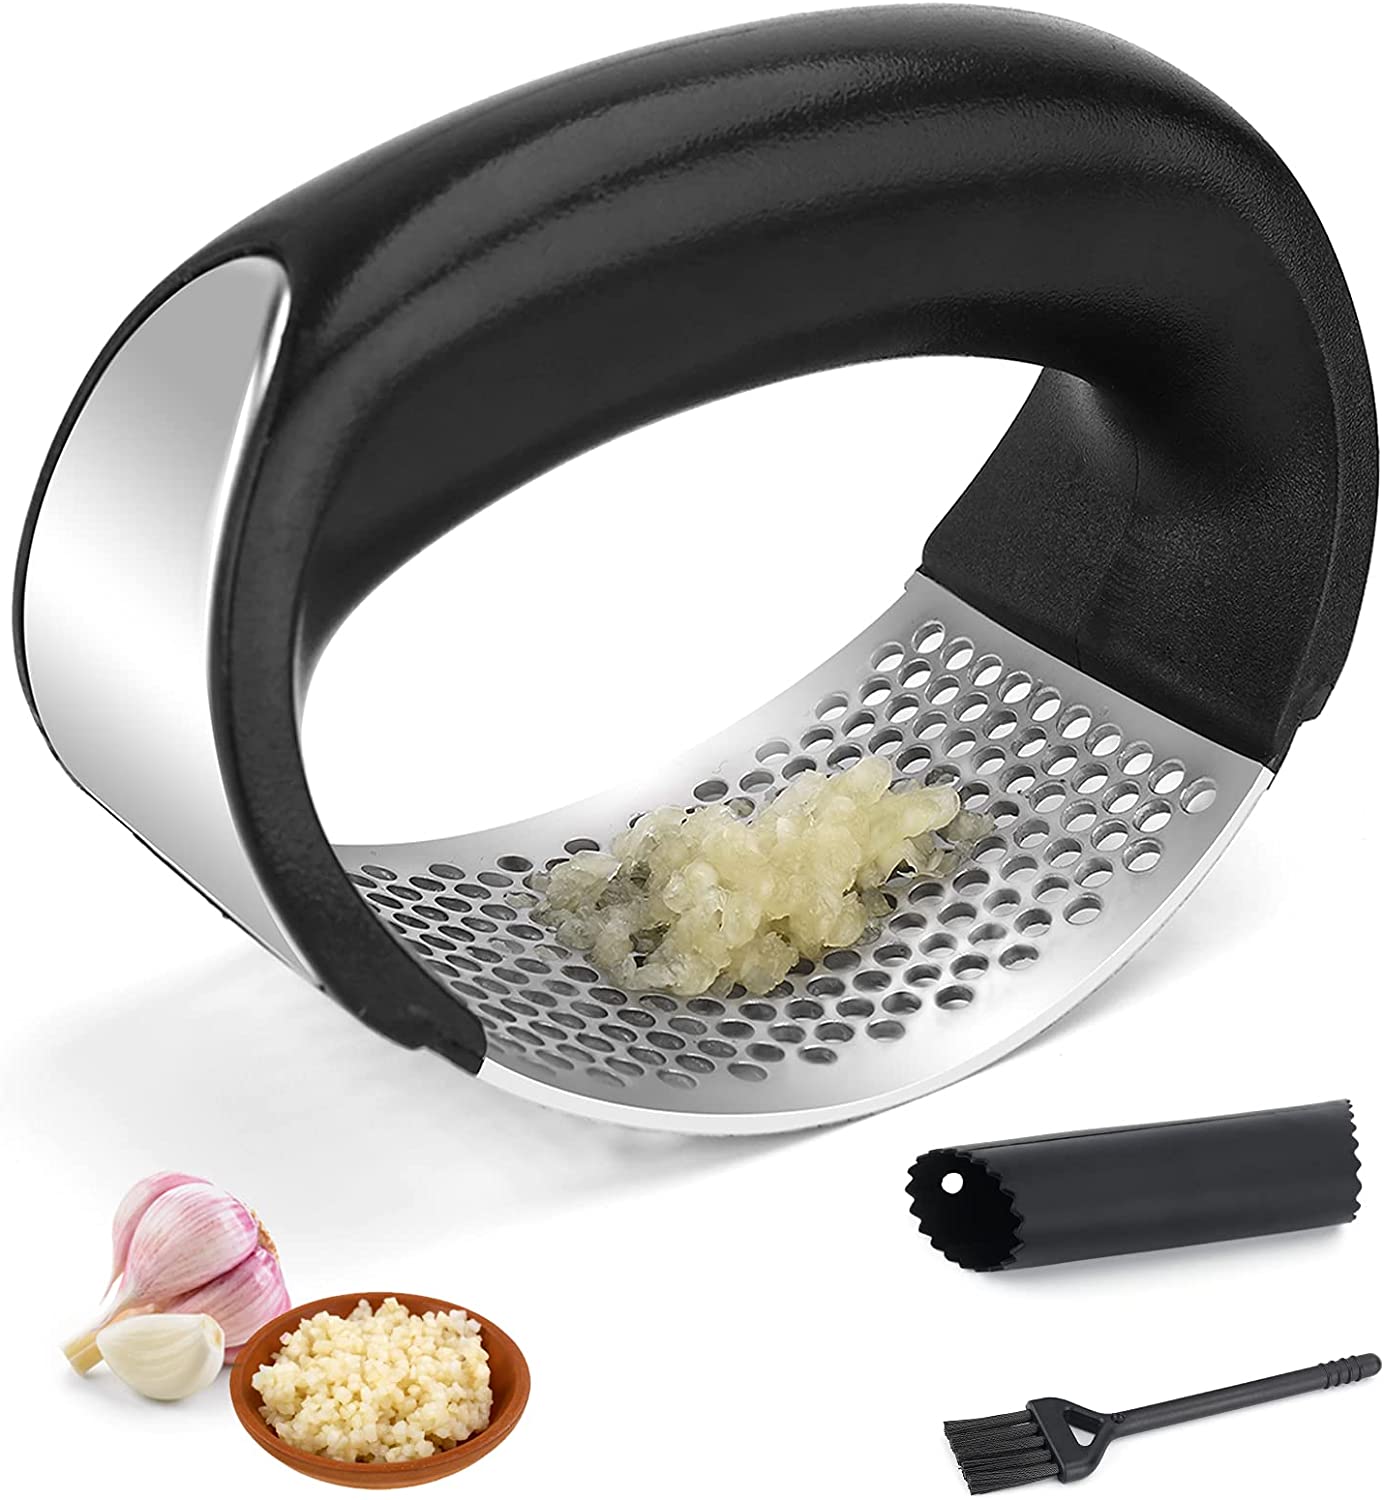 PSISO Rust Resistant Garlic Press For Kitchens, 3-Piece